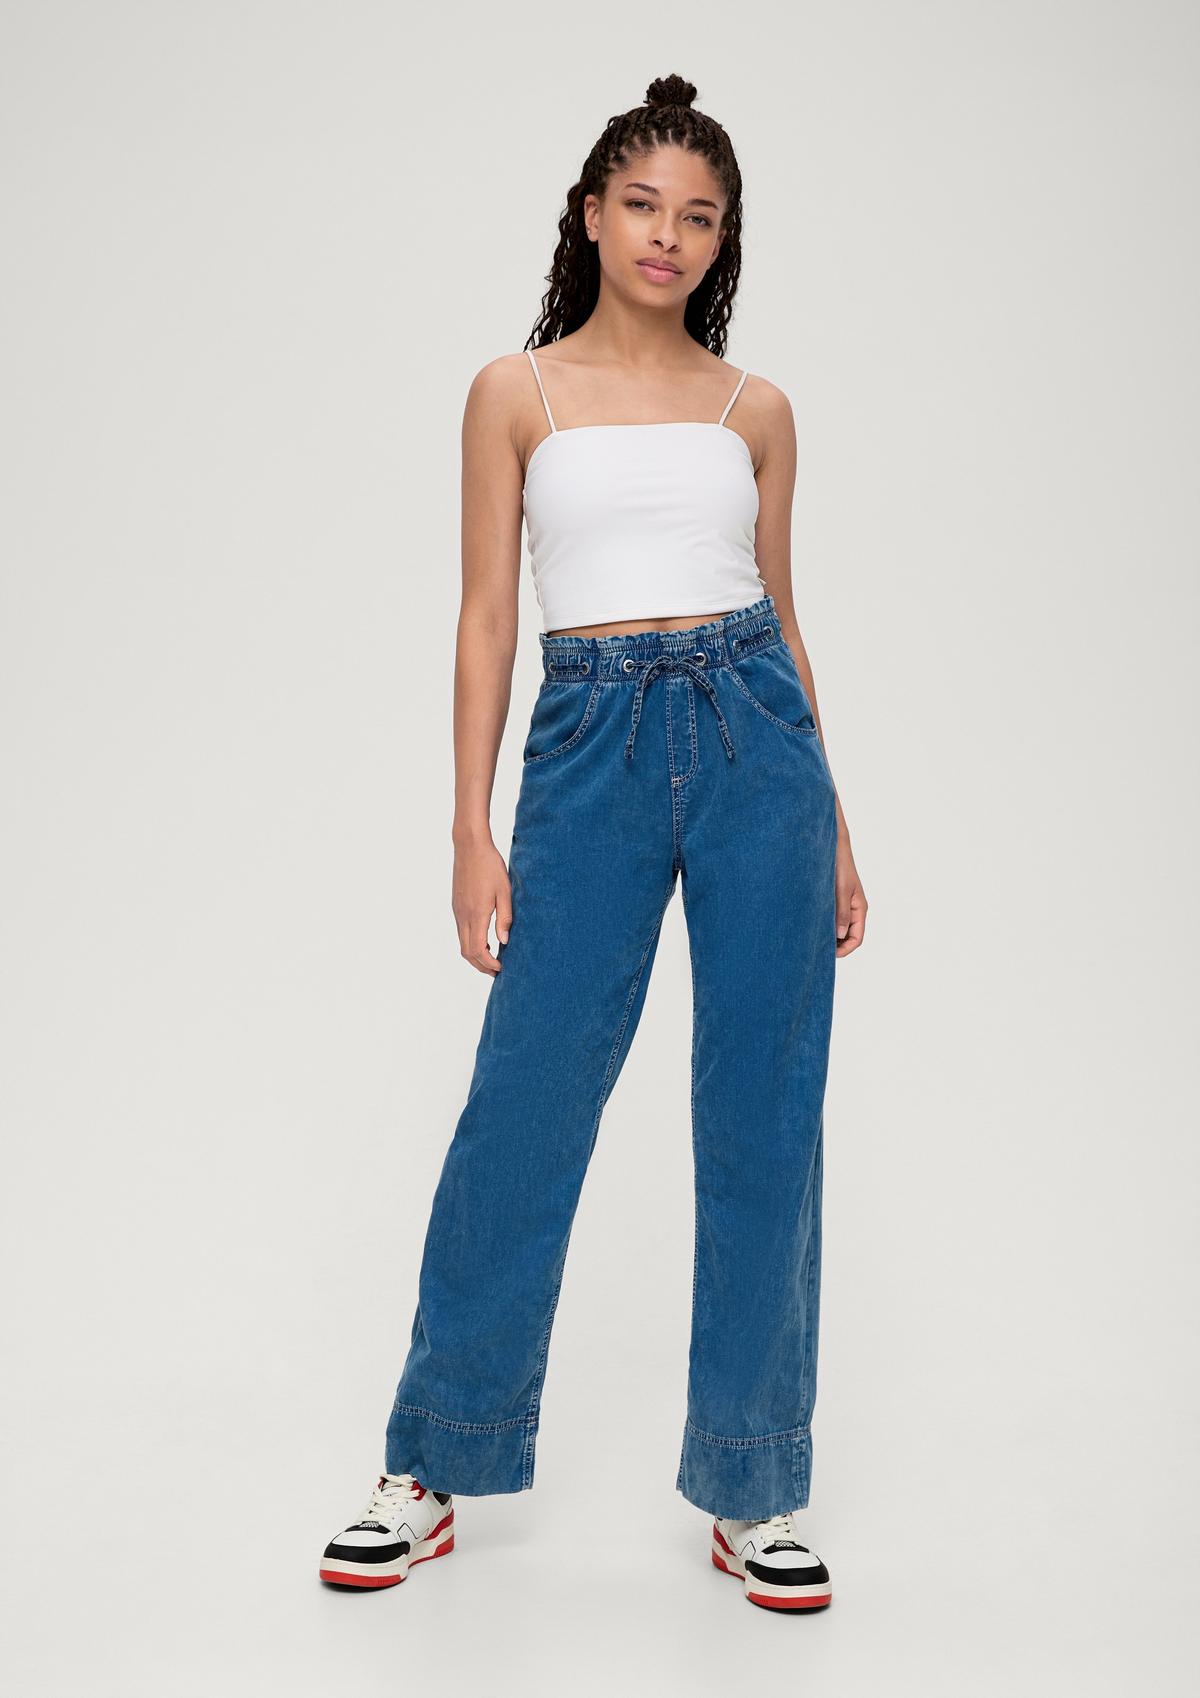 s.Oliver Jeans Catie / Slim Fit / Mid Rise / Wide Leg